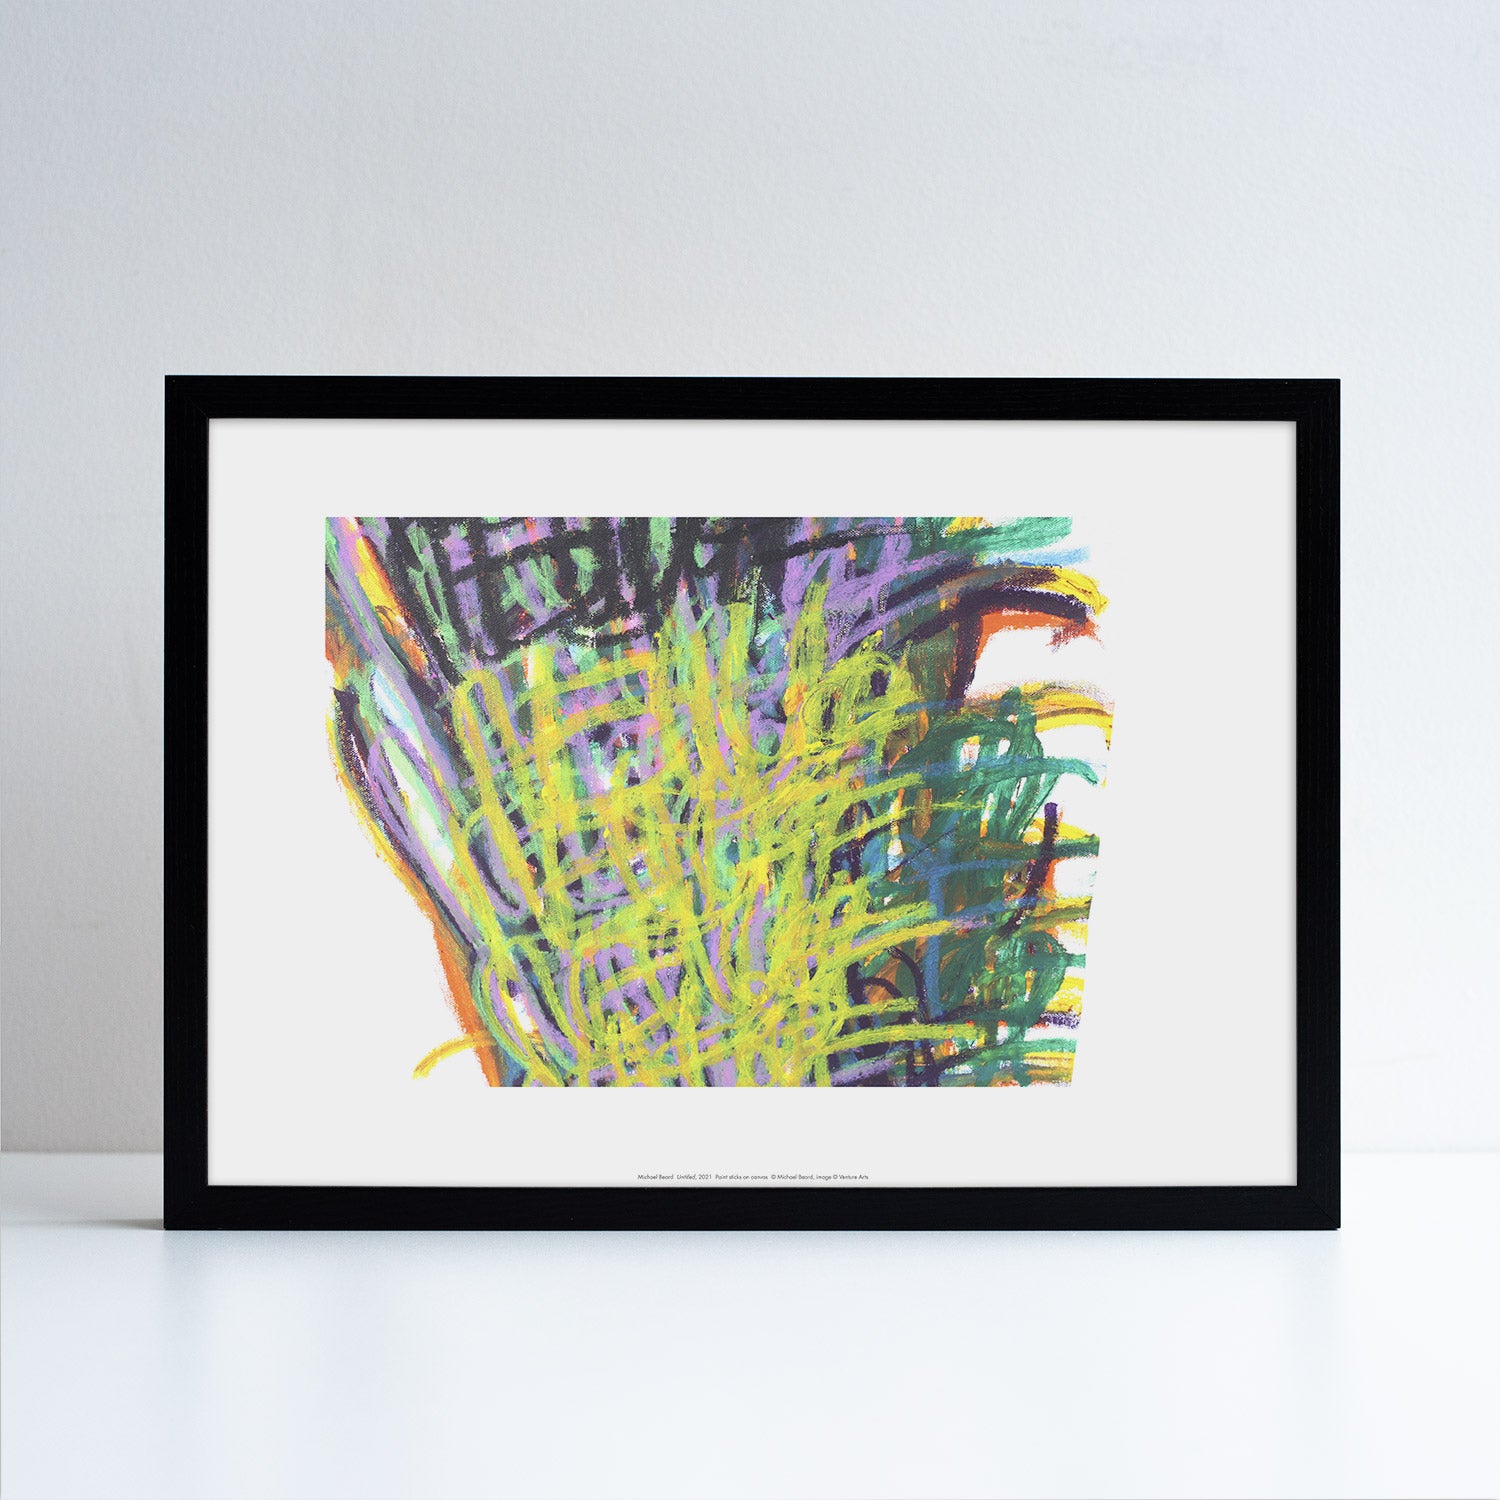 Reproduction of an abstract artwork by Michael Beard. Placed in a black frame.